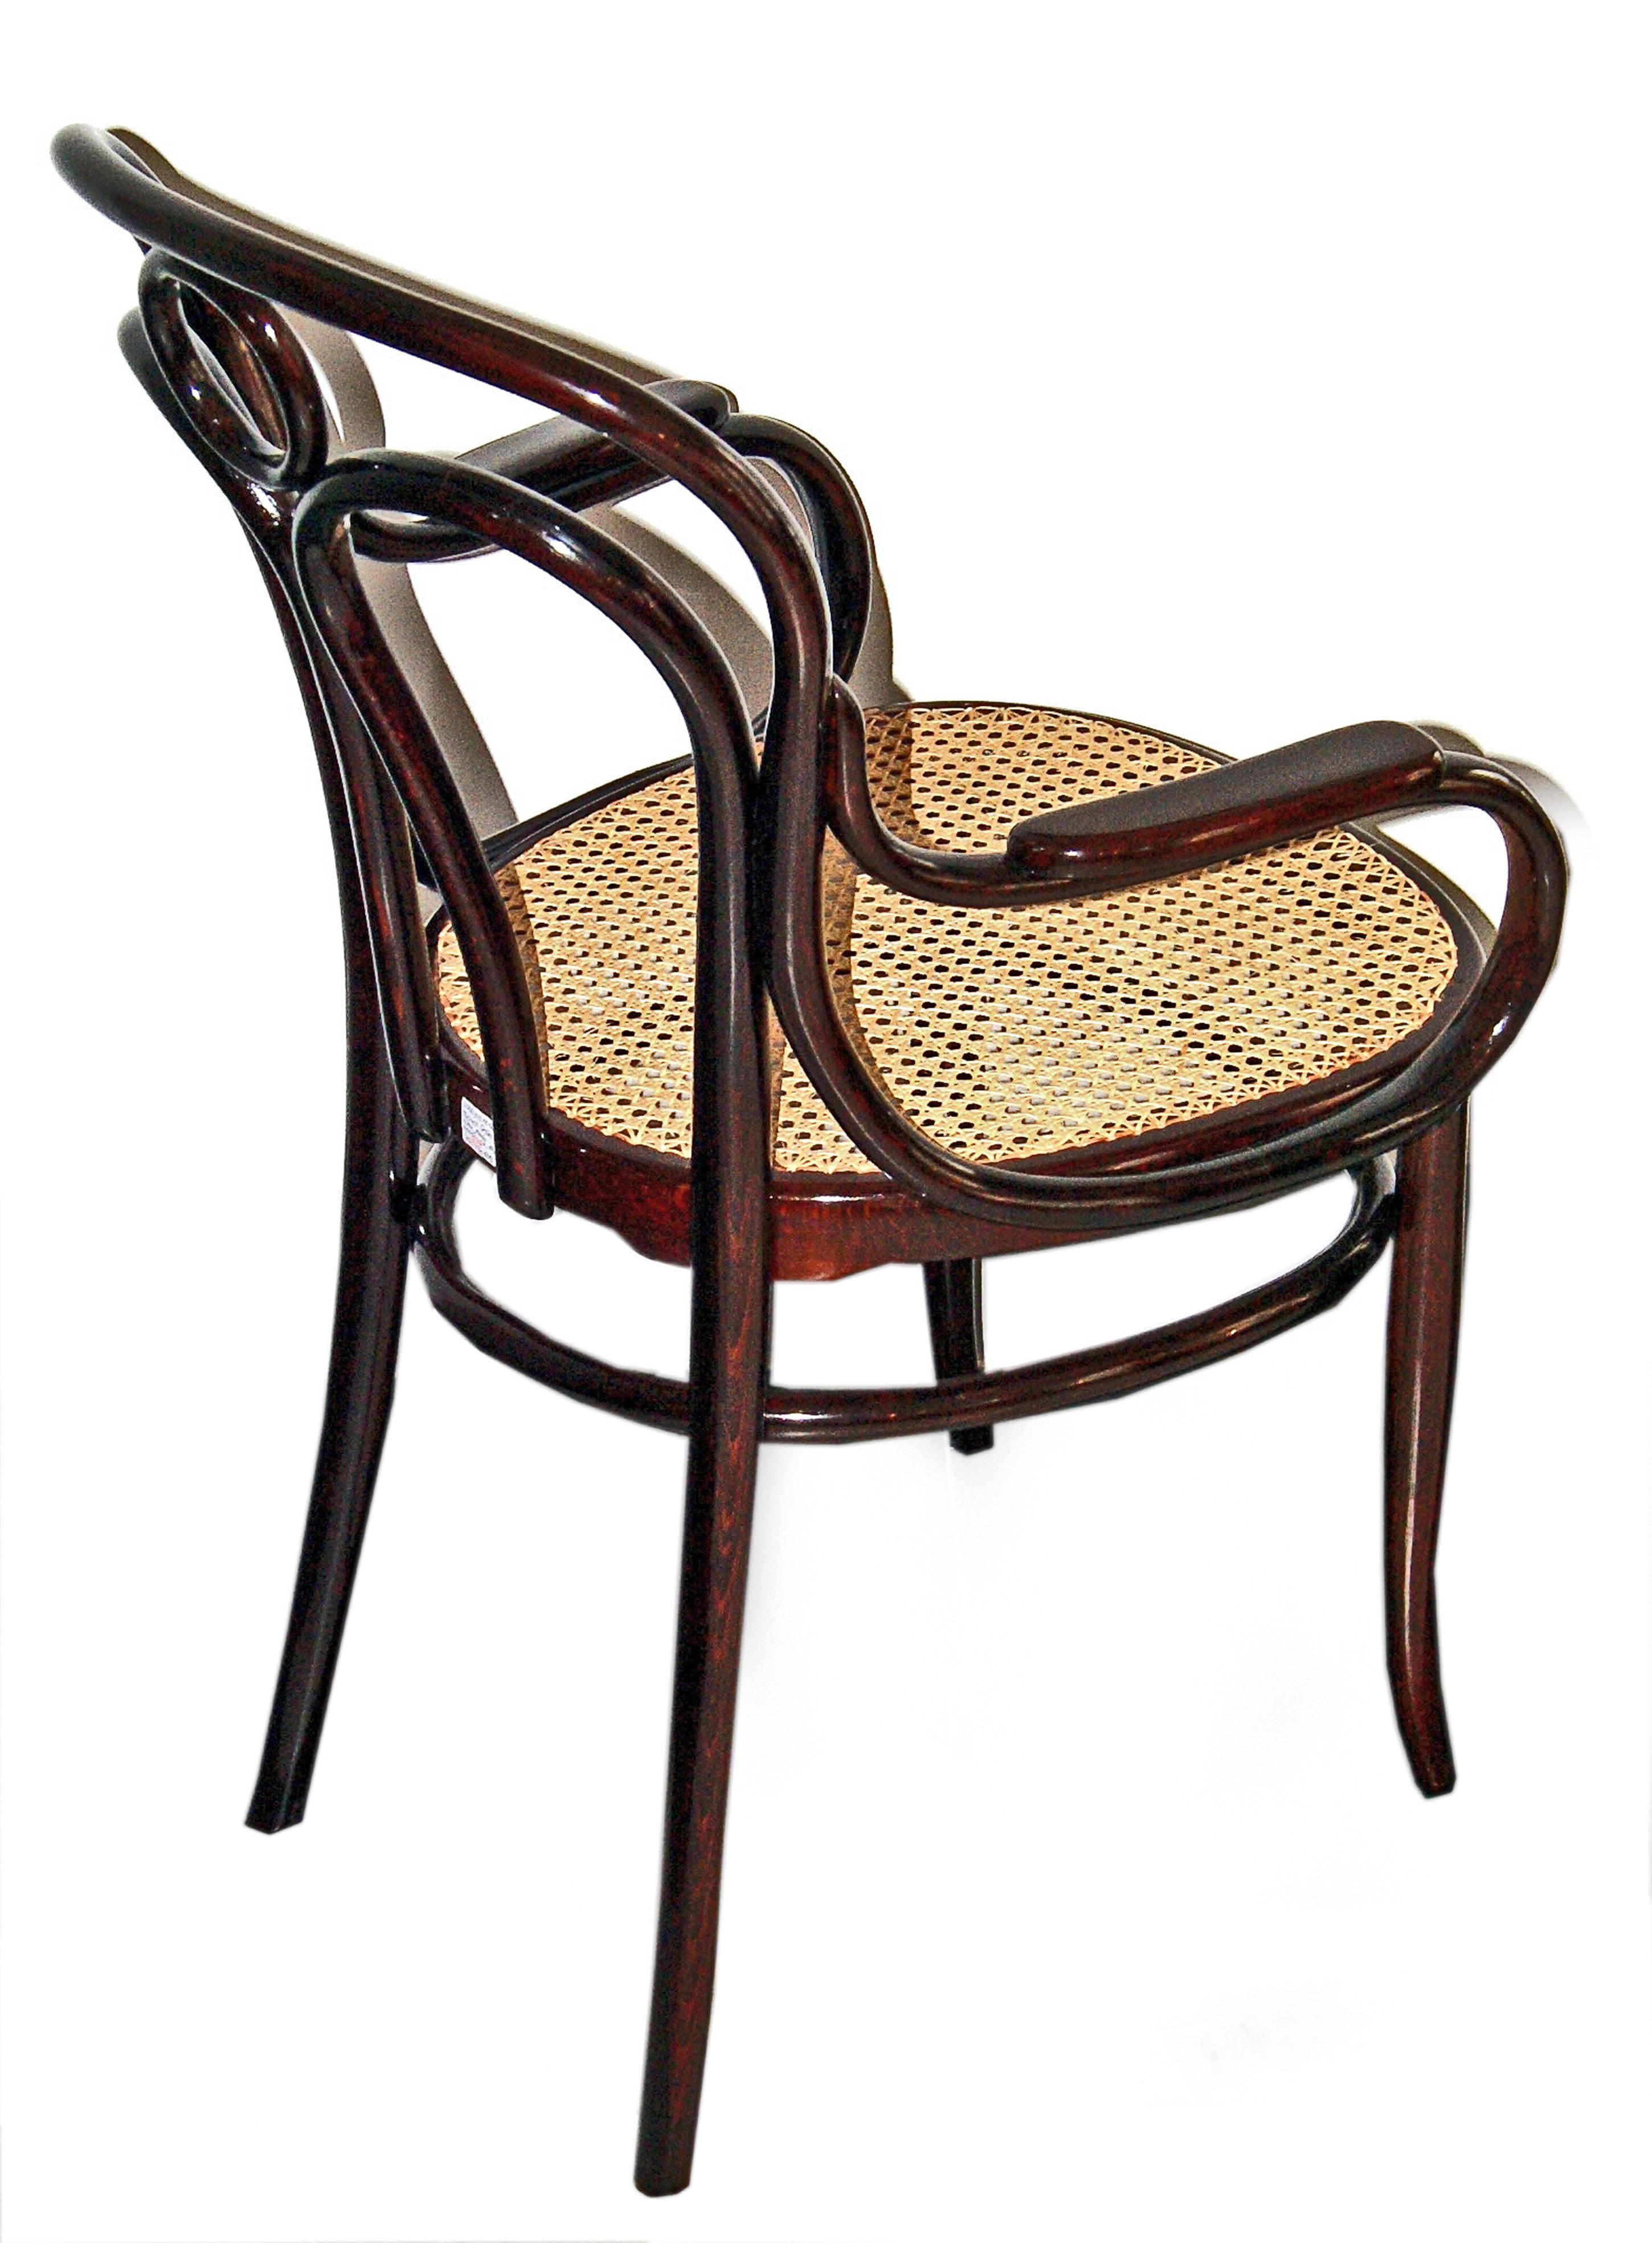 Early 20th Century Art Nouveau Bentwood Armchair 36 J. & J. Kohn Vienna Mahogany Stained Made 1905